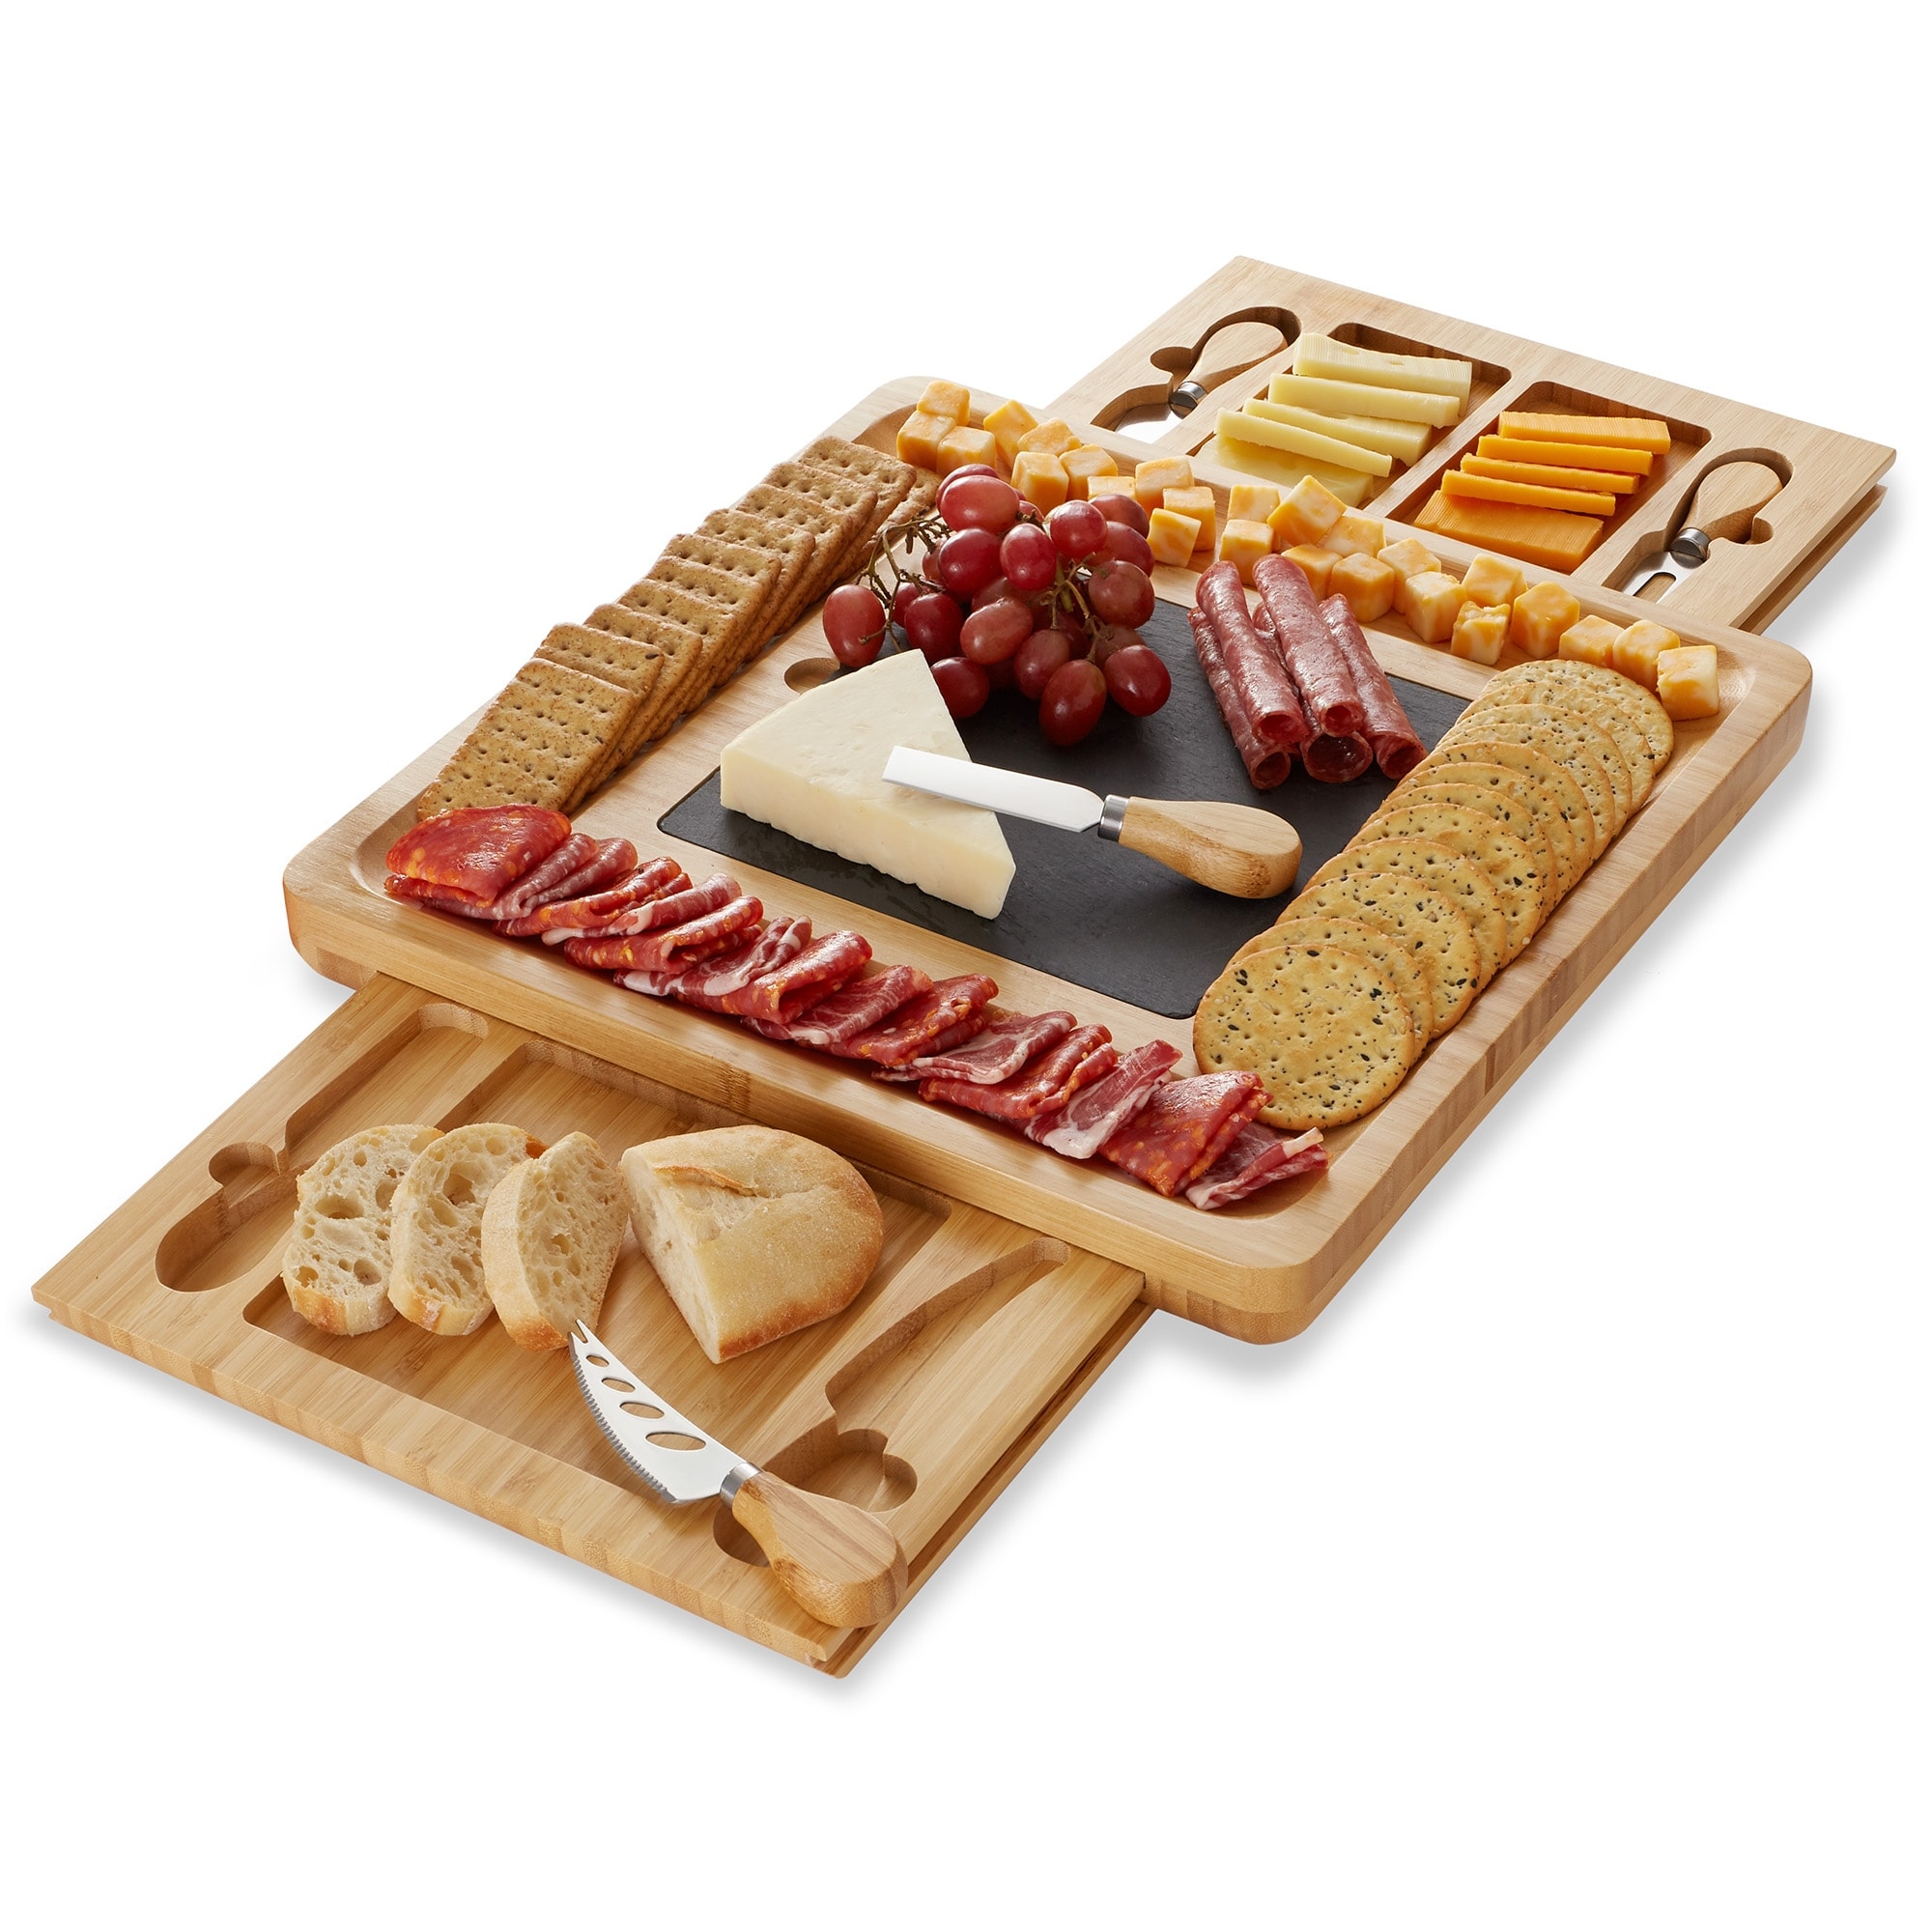 https://ak1.ostkcdn.com/images/products/is/images/direct/a89c76ce81fb3d86561ea372006aa92da44c749c/Bamboo-Cheese-Board-and-Knife-Set-with-Slate-Center-by-Casafield.jpg